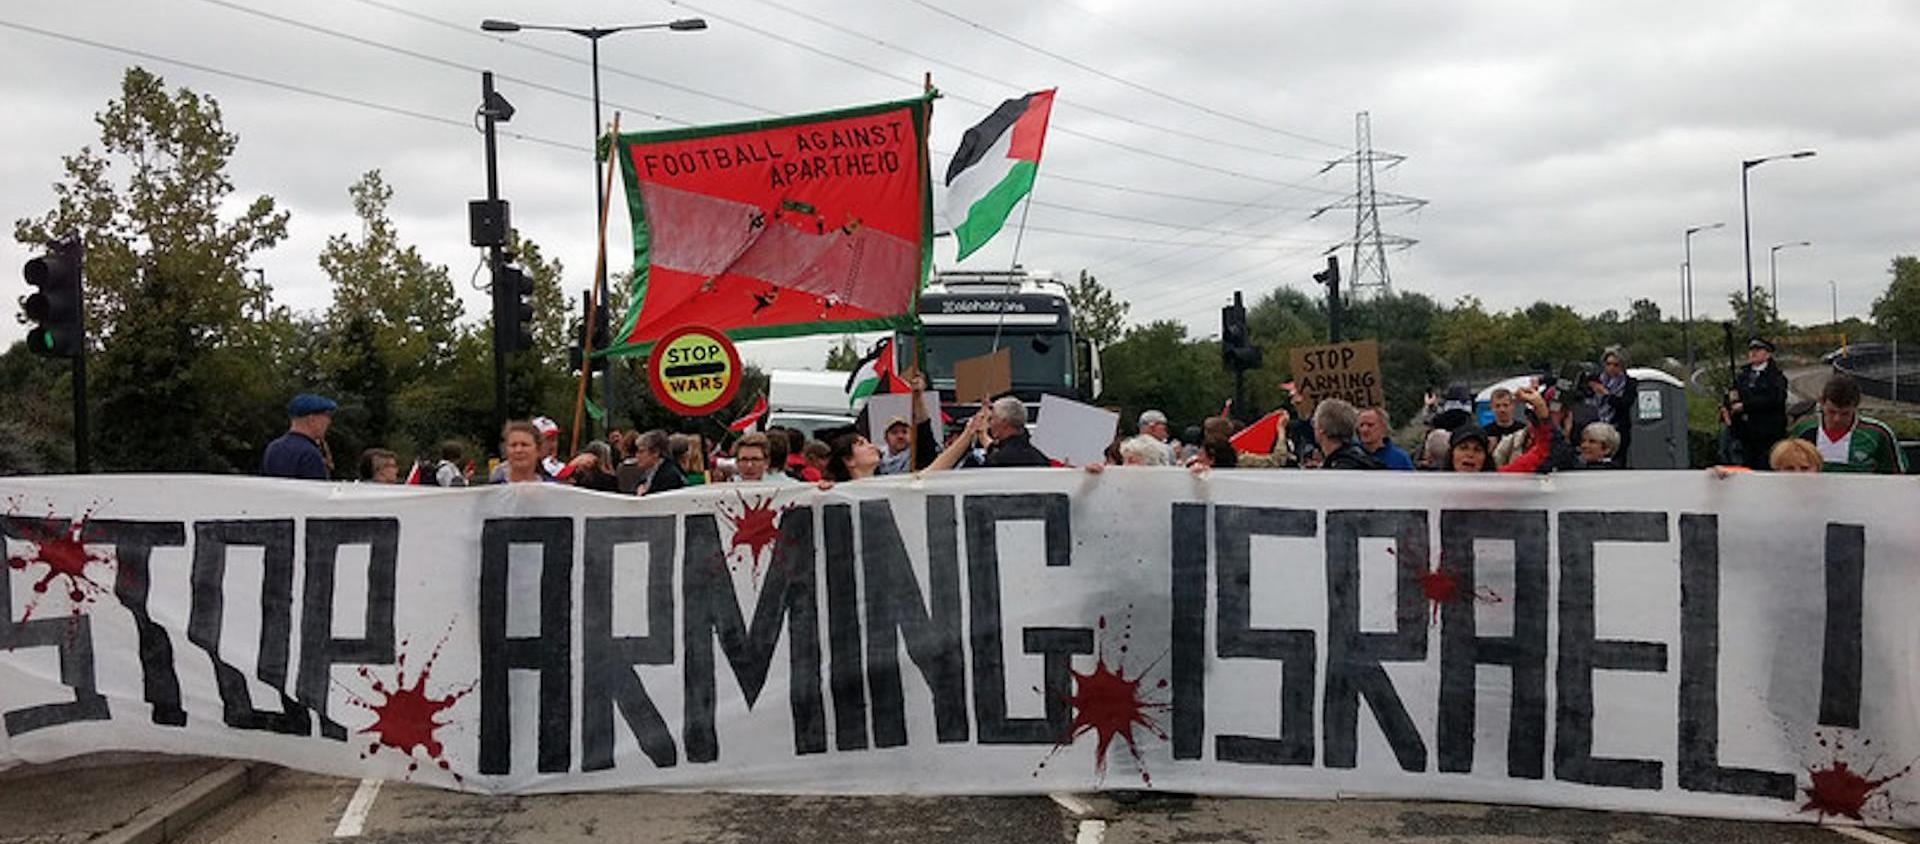 Protest blocking road to arms fair with a banner saying "Stop Arming Israel".